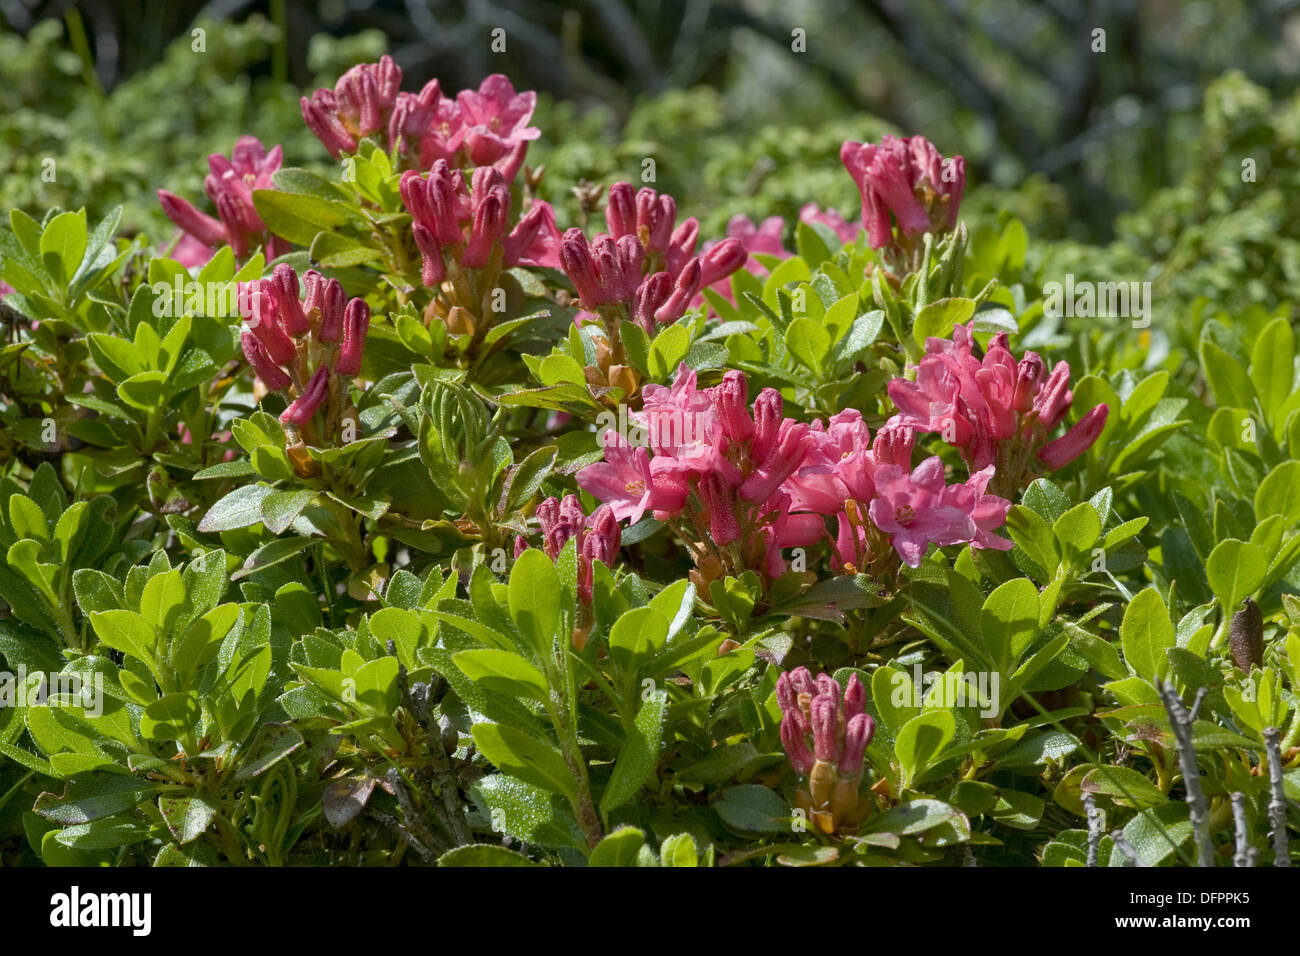 hairy rhododendron, rhododendron hirsutum Stock Photo